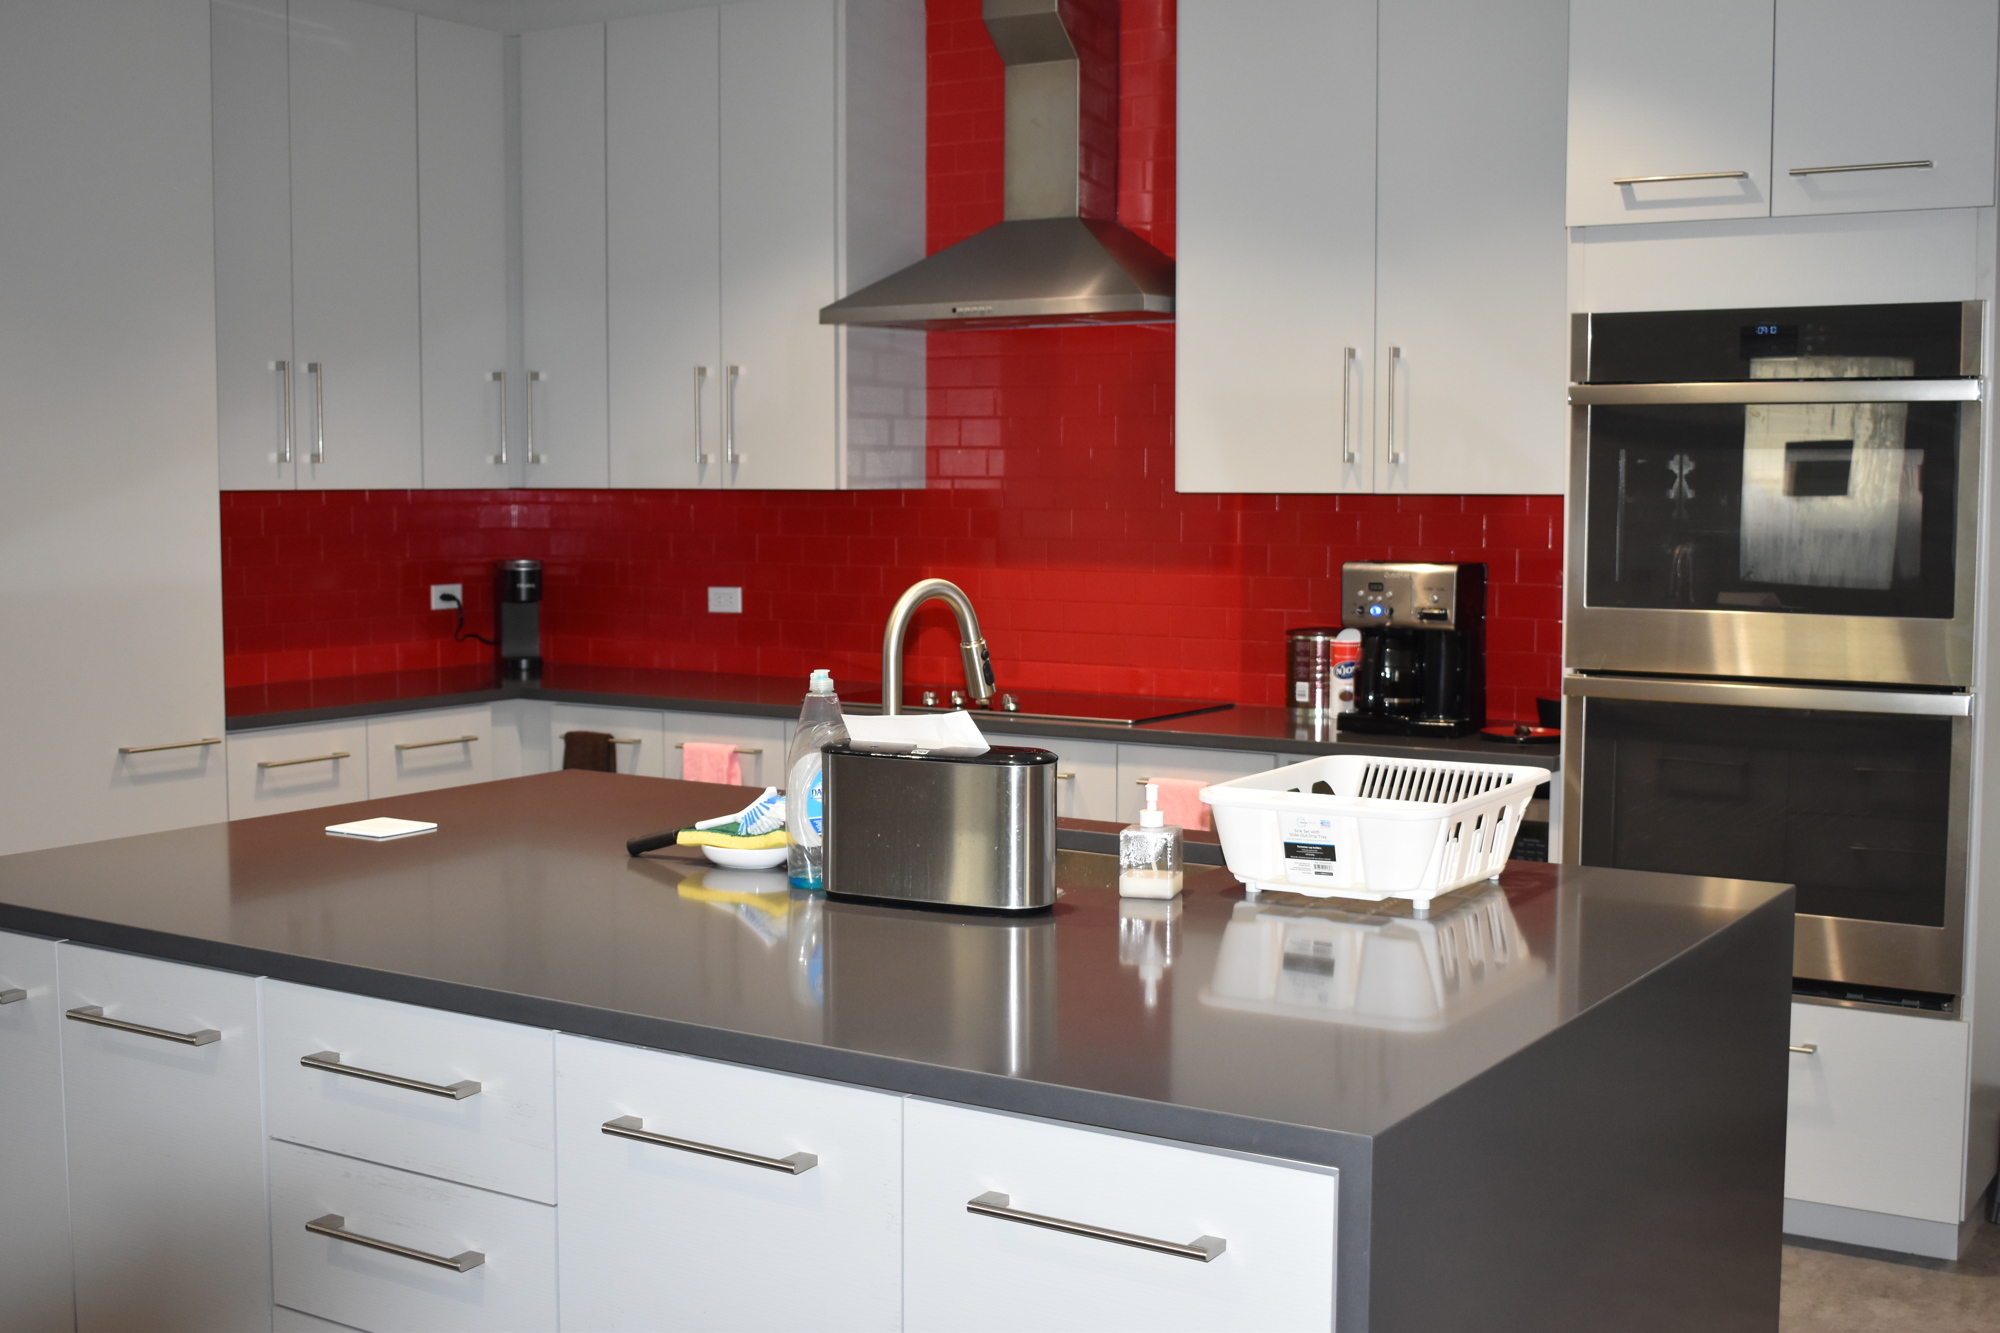 The Fire Station 91 kitchen has an island, a stovetop, a microwave, a dishwasher and two ovens.